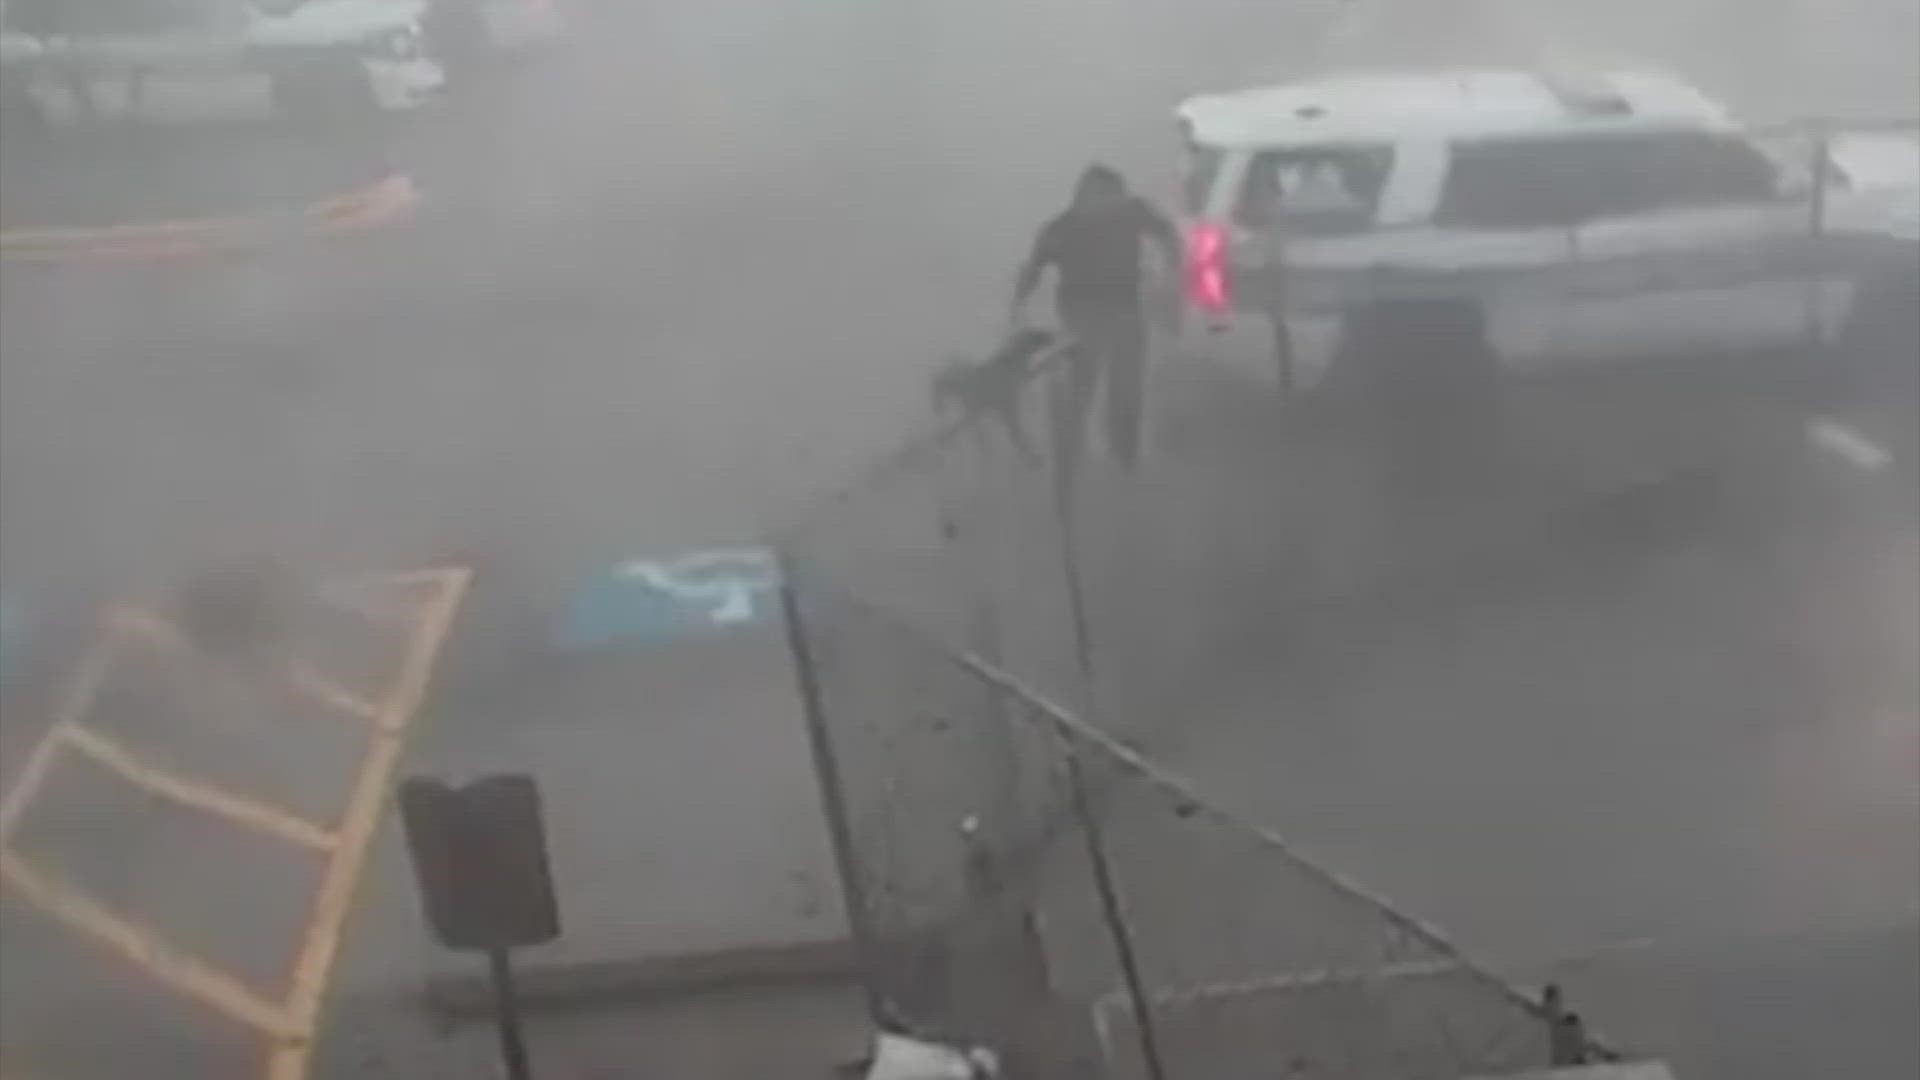 Viral video captures the moment officer Joel Nitchman rushed out into a dangerous storm to get his partner of 8 years to safety.